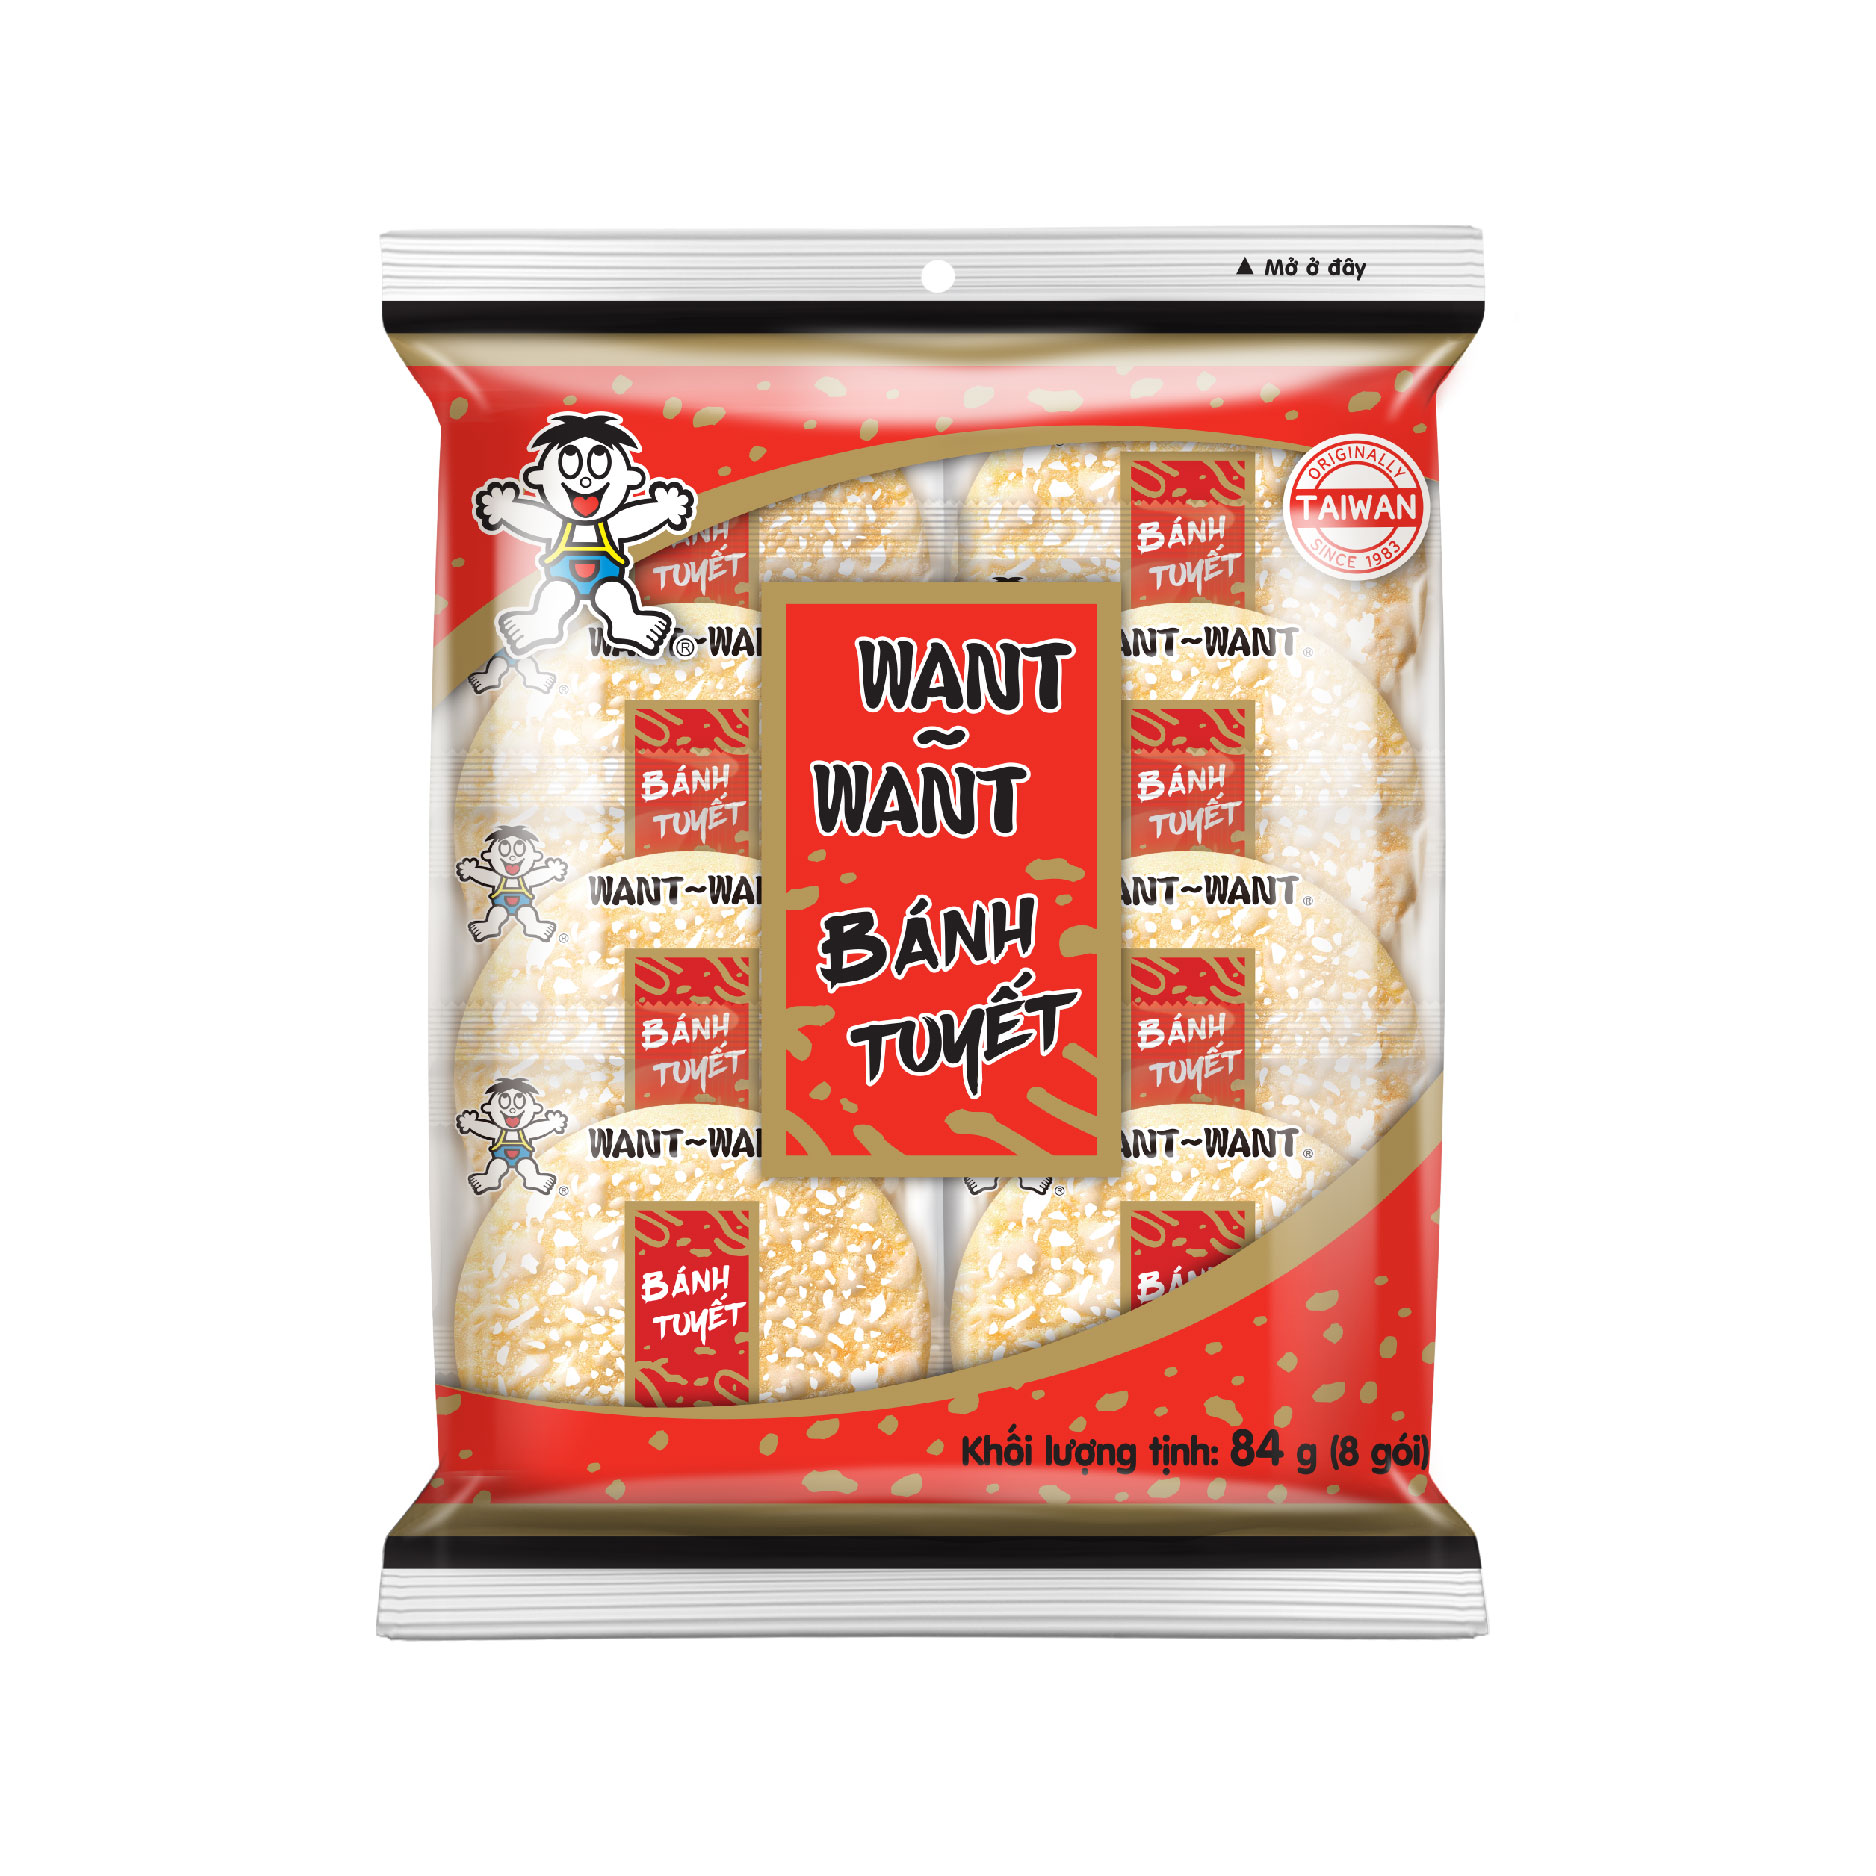 WANT WANT Rice Snack Japanese Soy Sauce Flavor 25g